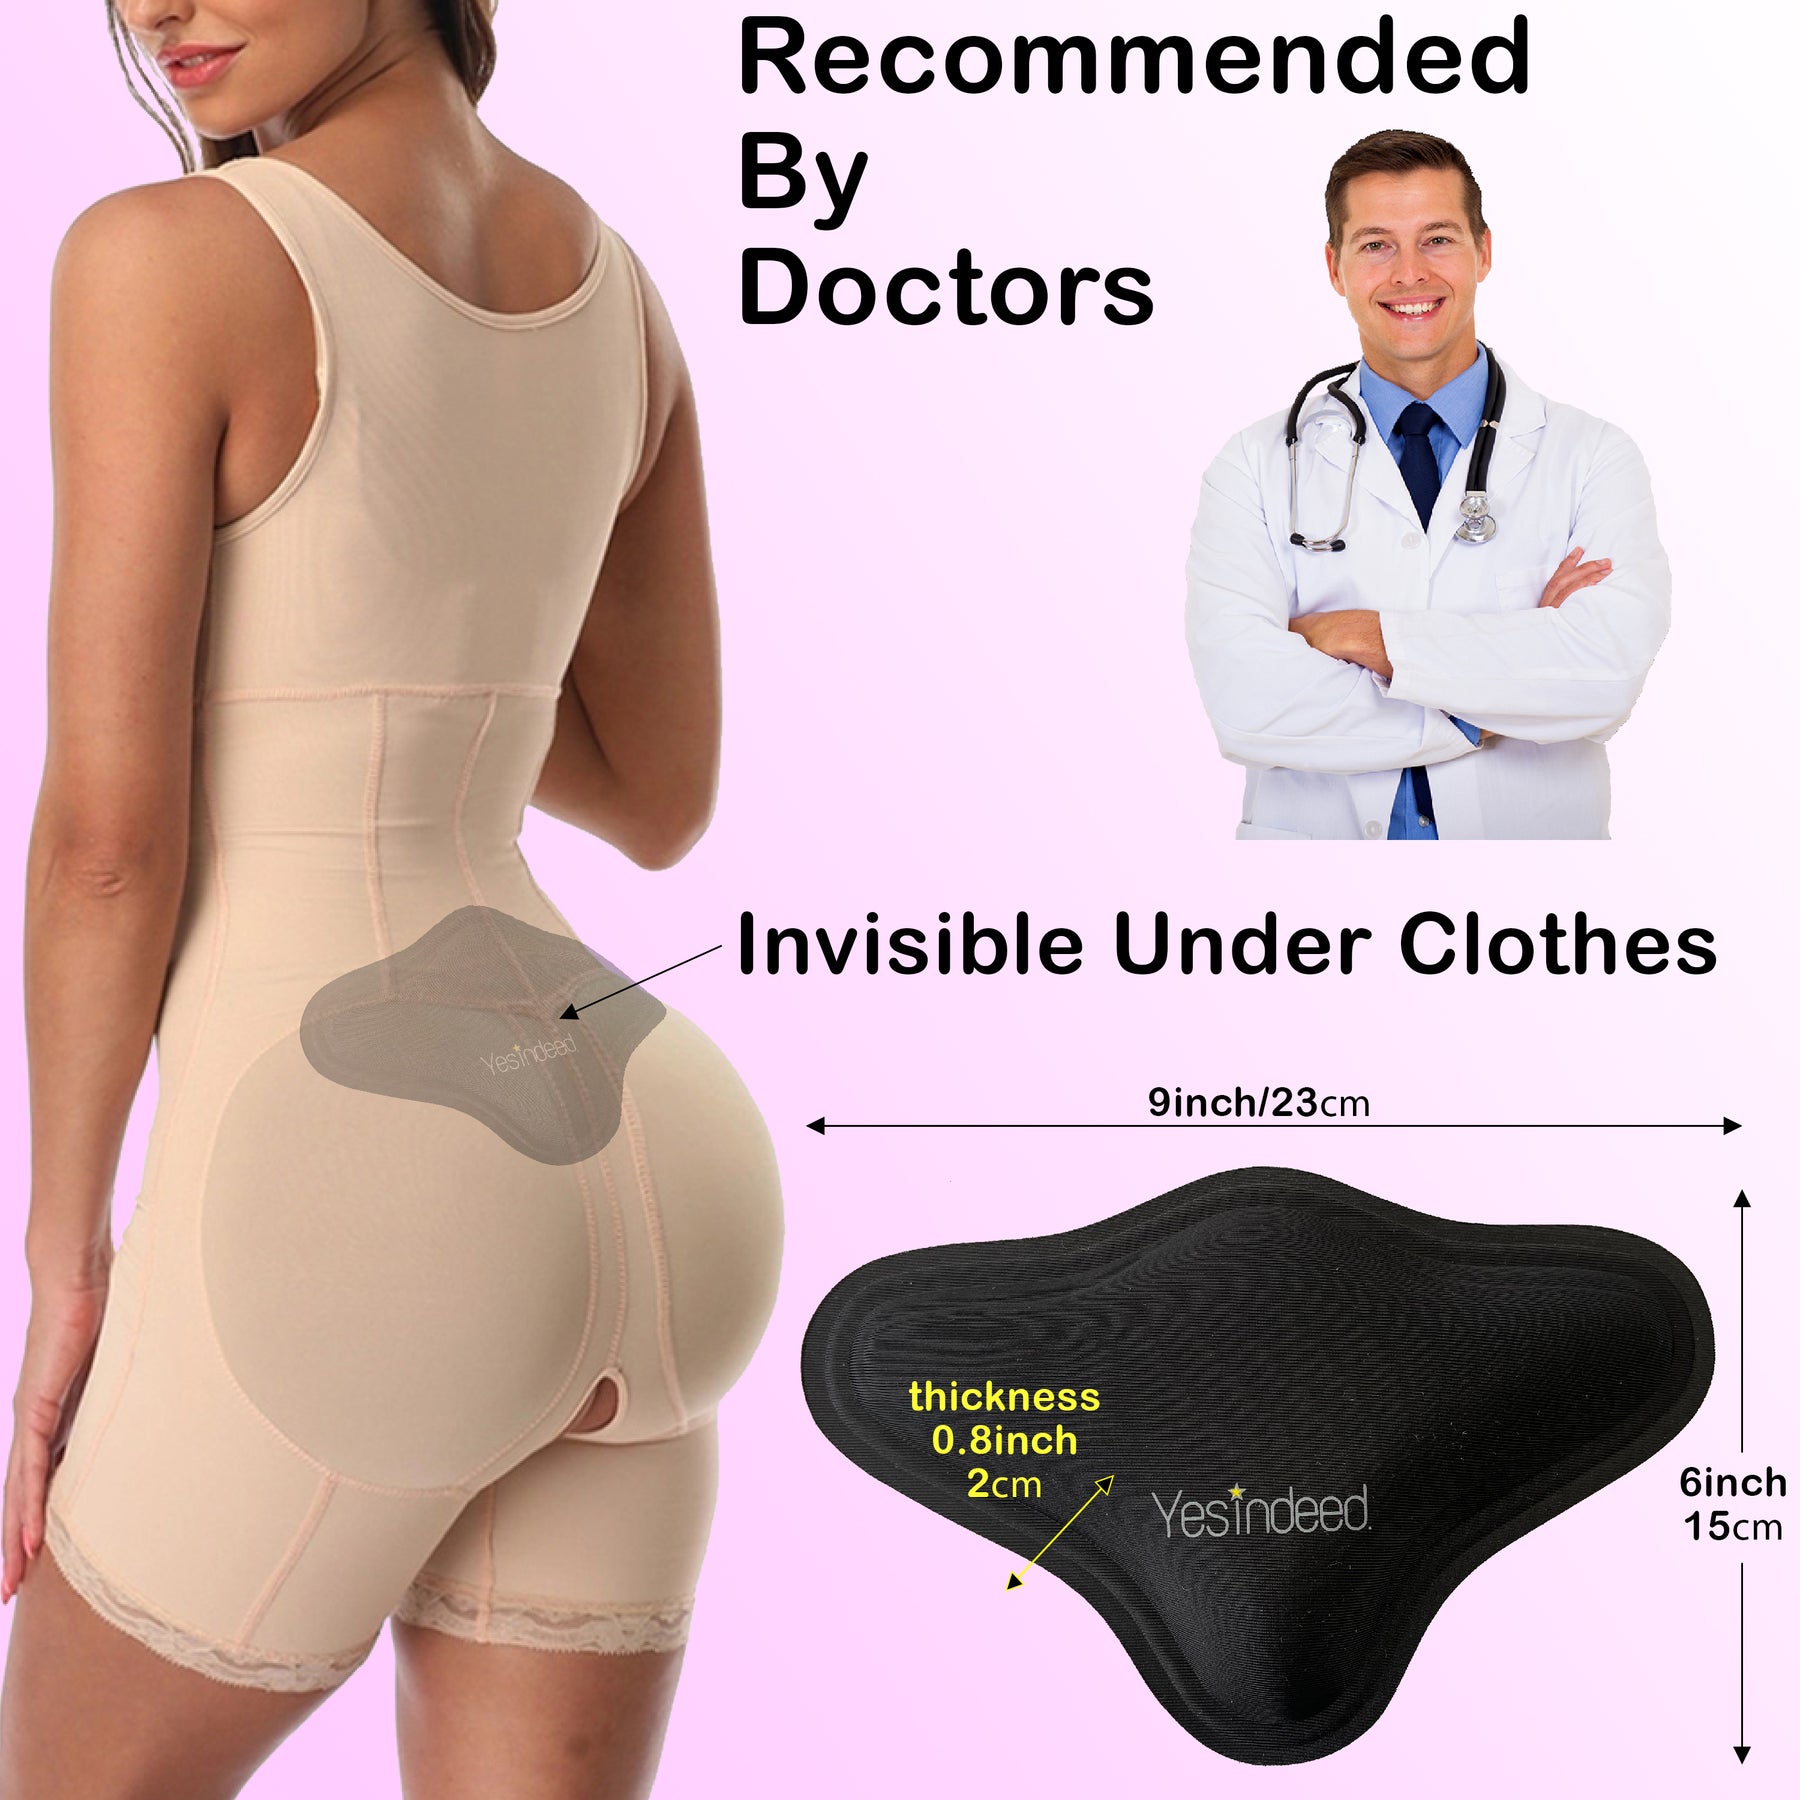  Lipo Back Board Post Surgery liposuction 360- Supportive 360  Liposuction Recovery Foam Wrap, BBL Supplies, Ab & Lipo Board 360 for  Comfort : Health & Household